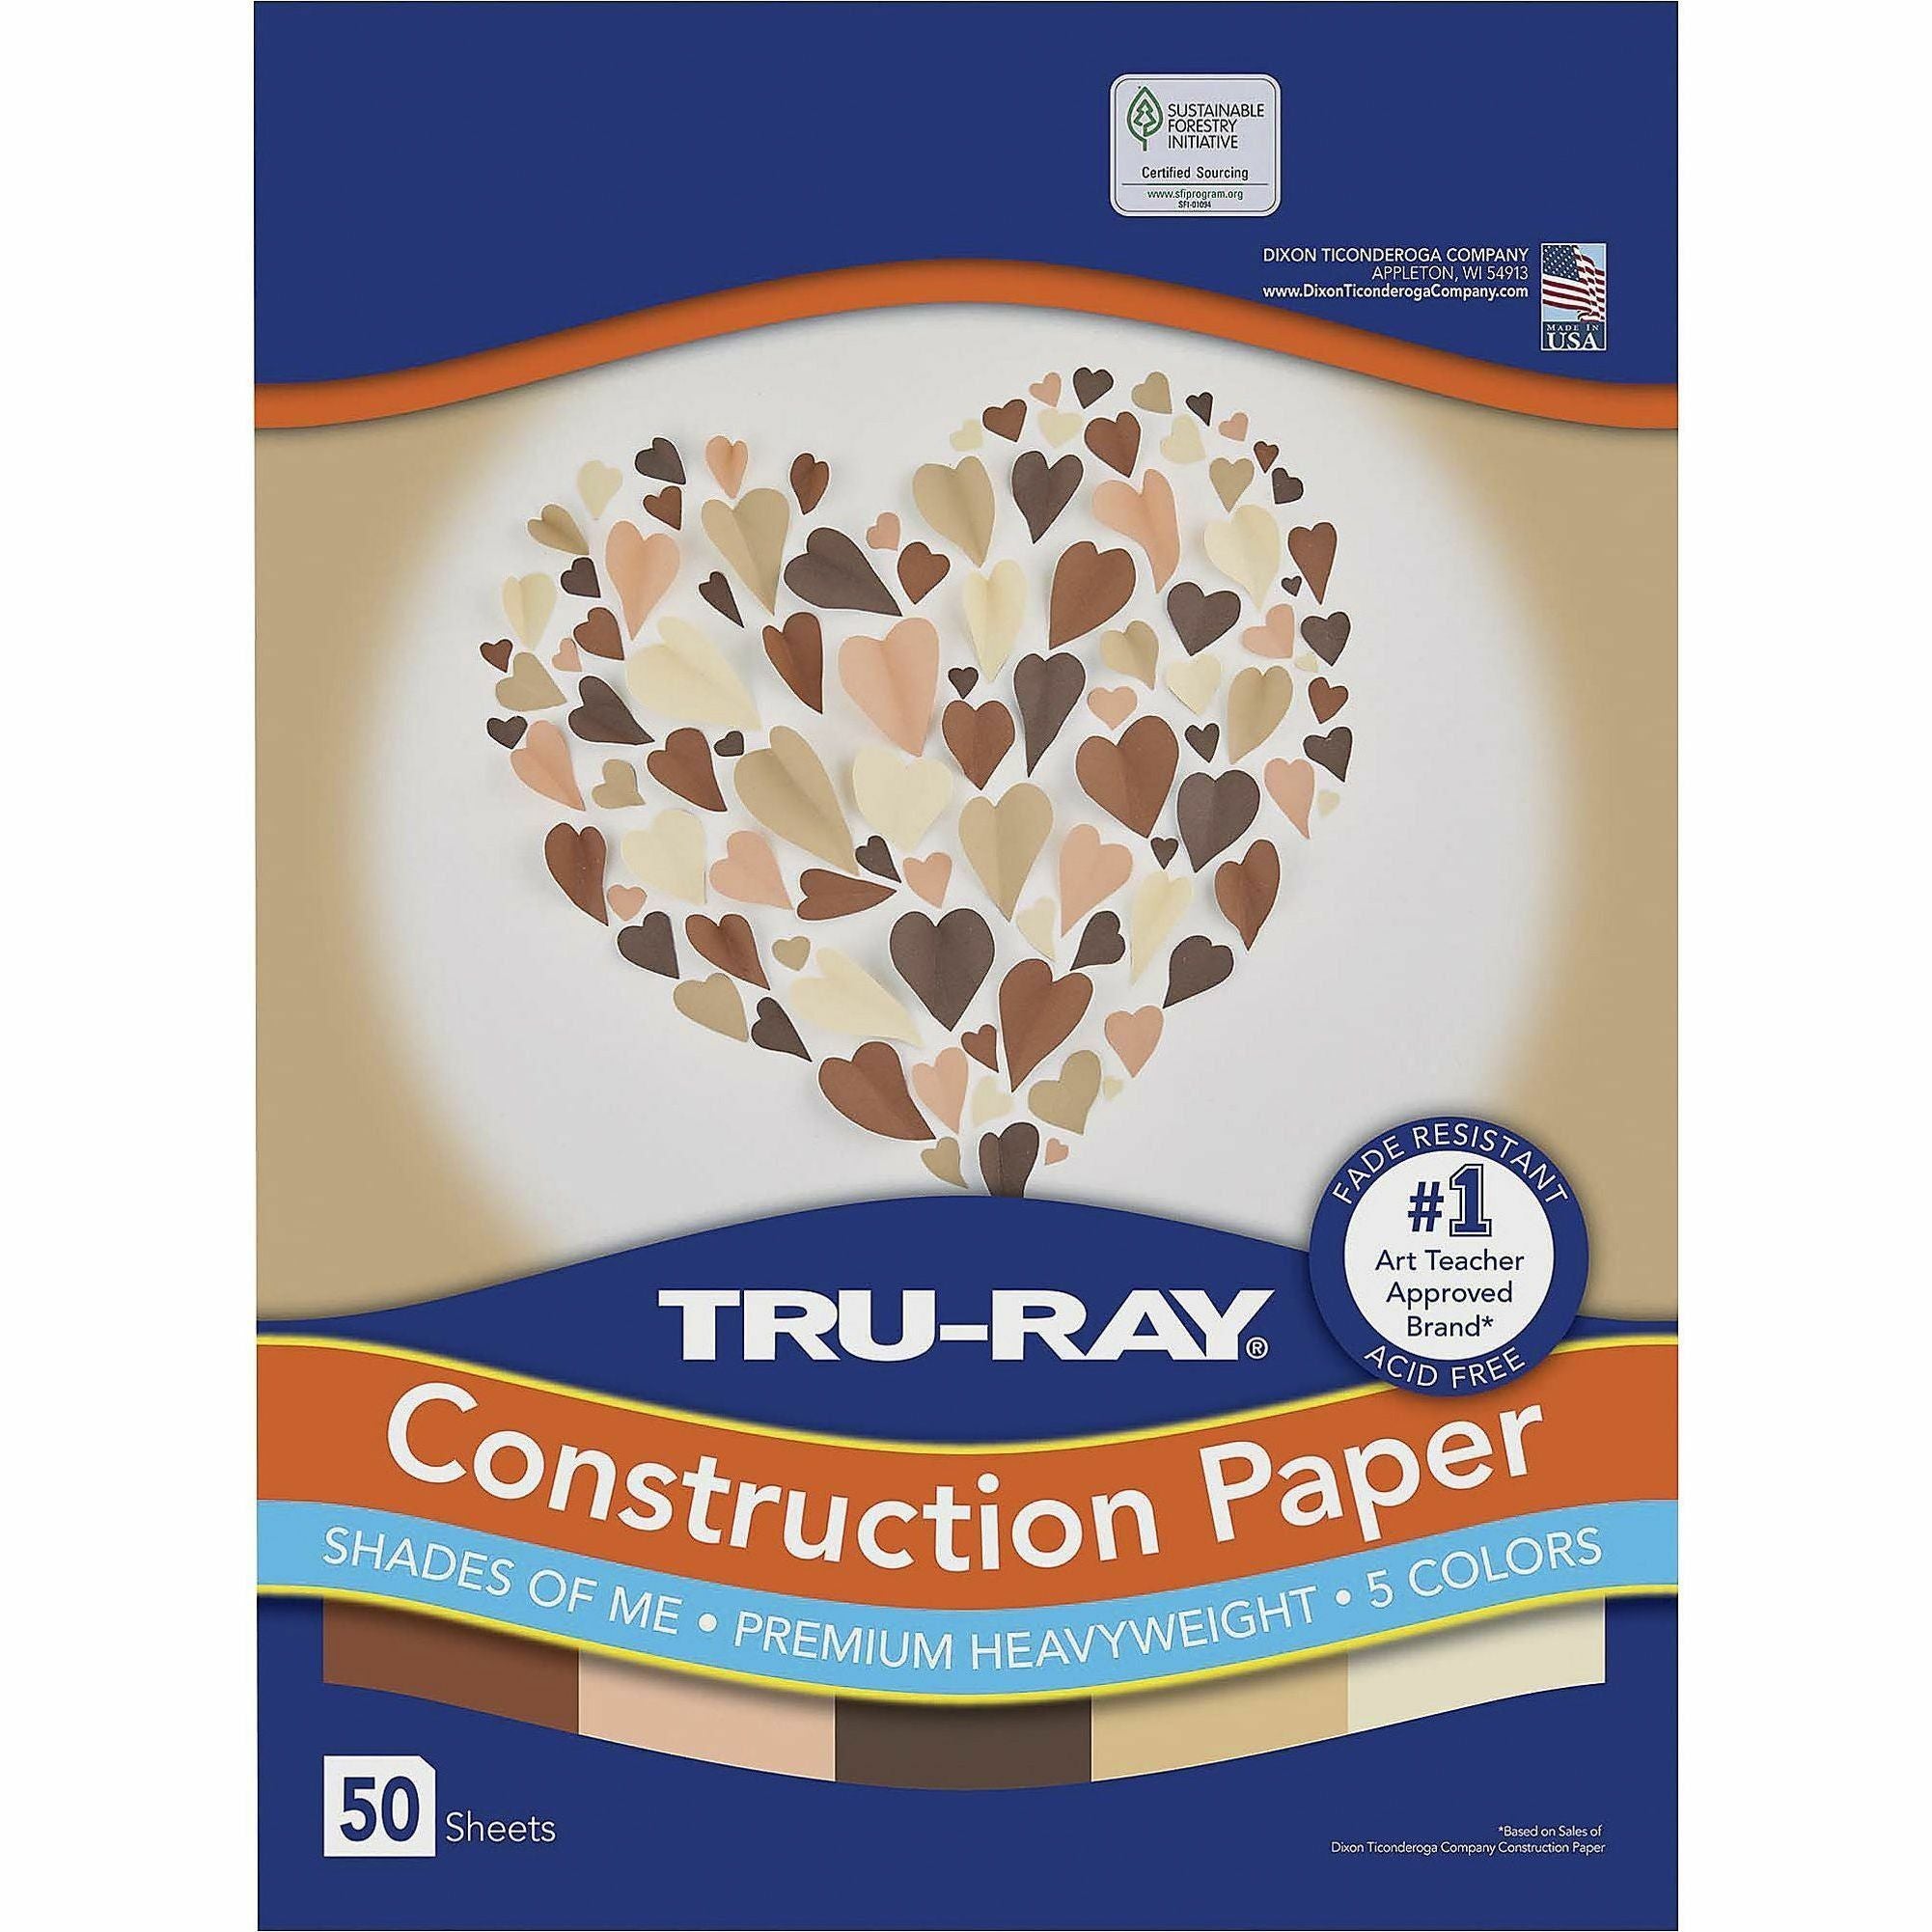 tru-ray-construction-paper-art-project-craft-project-9width-x-12length-76-lb-basis-weight-50-pack-assorted-fiber-sulphite_pacp102949 - 2